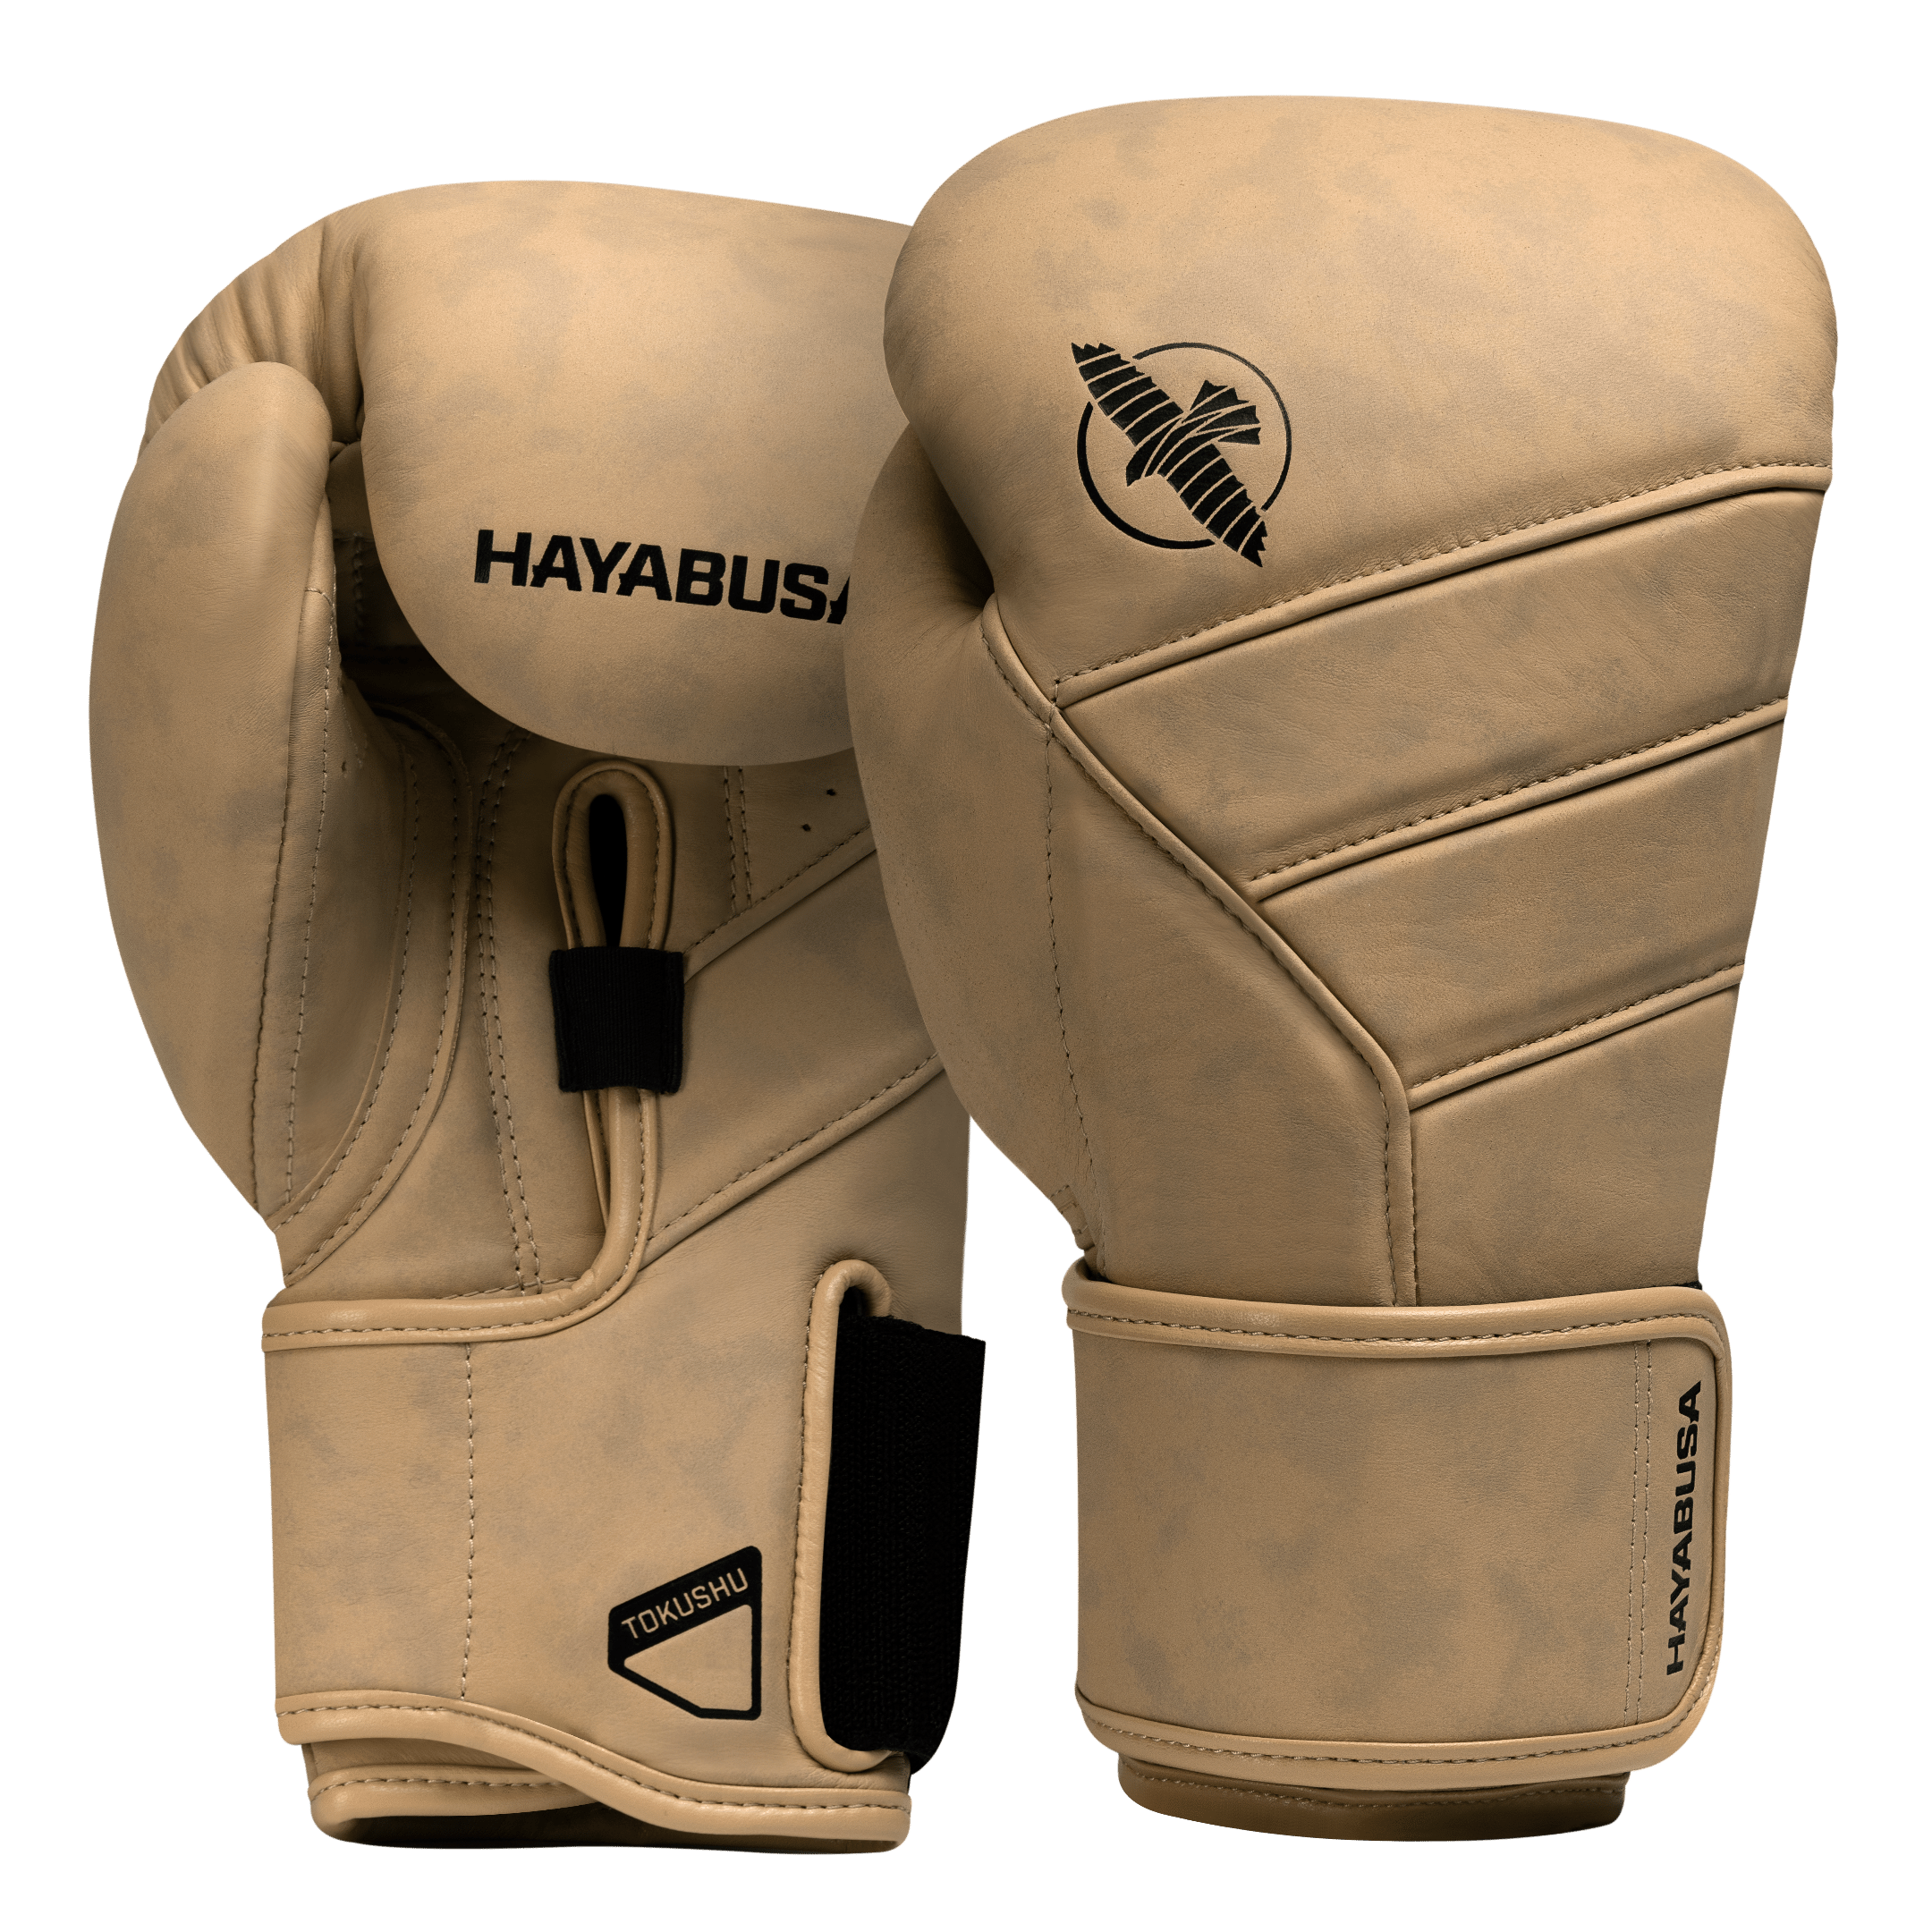 Hayabusa | Boxing Gloves - T3 LX Boxing Gloves - XTC Fitness - Exercise Equipment Superstore - Canada - Boxing Gloves